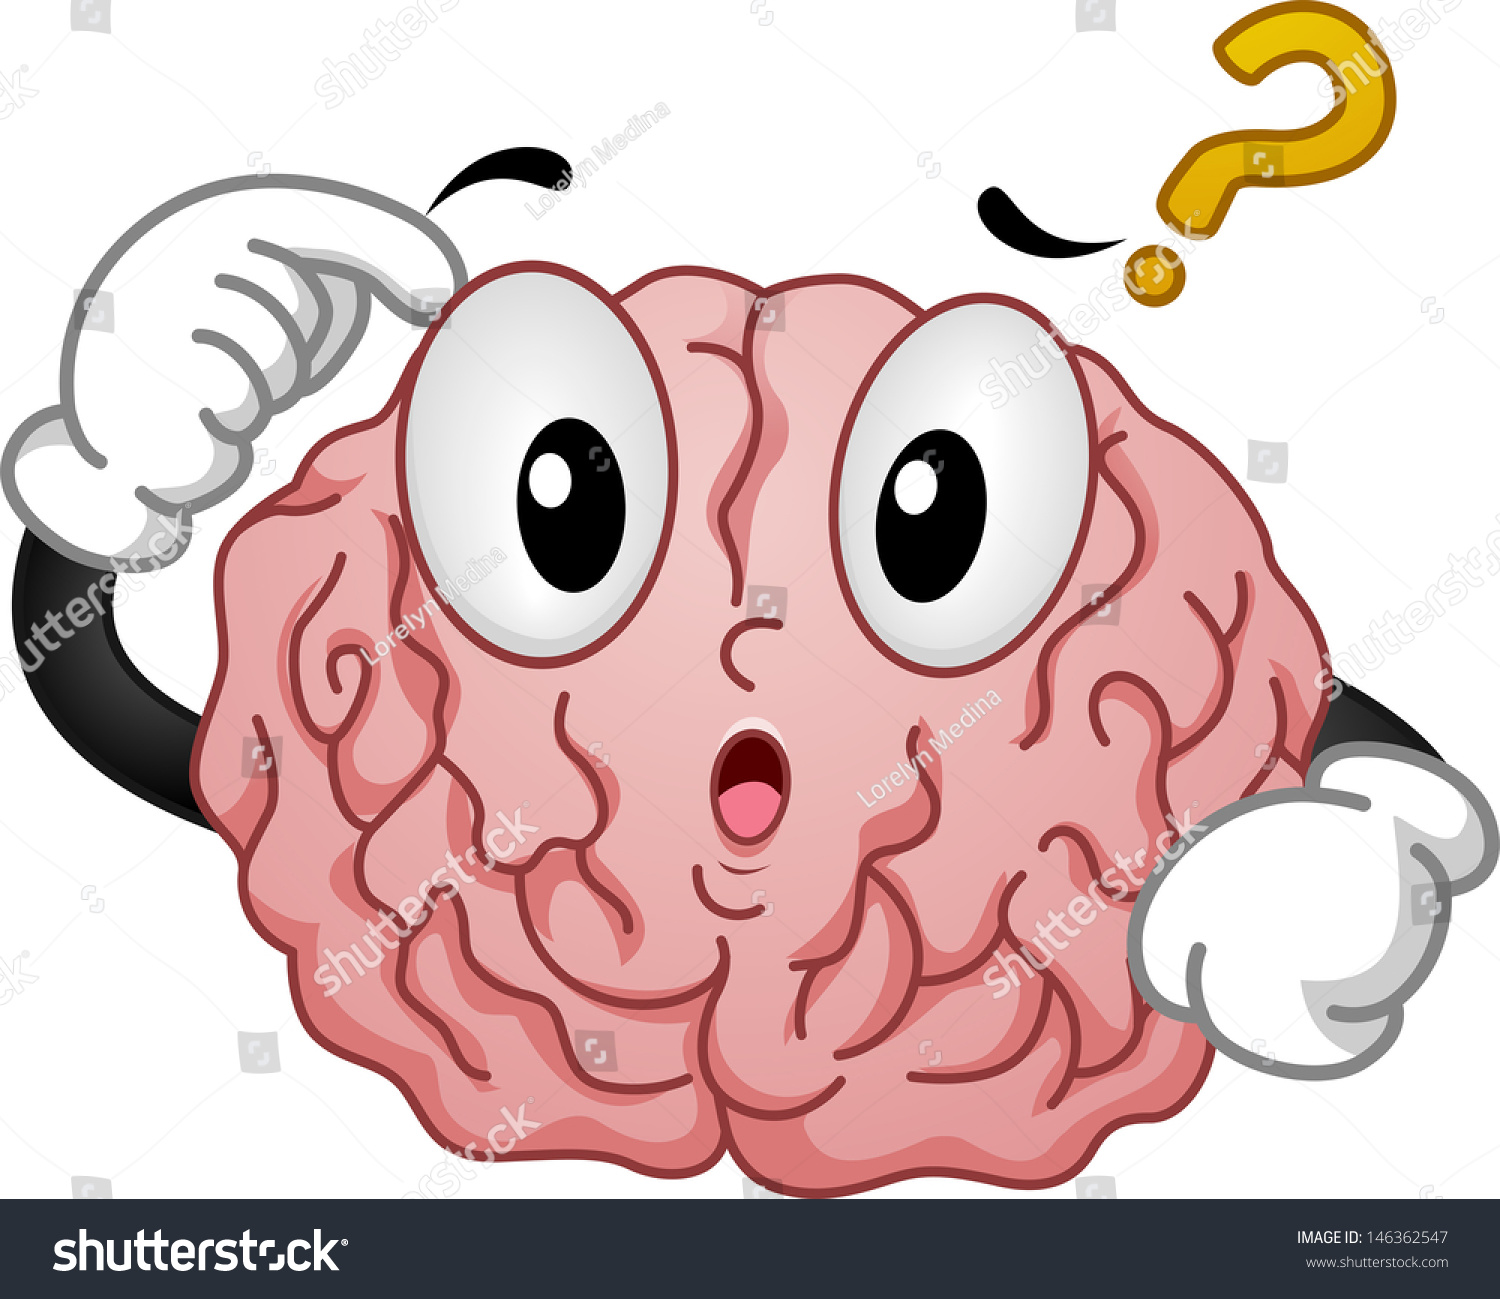 Illustration Of Thinking Brain Mascot With Question Mark - 146362547 ...